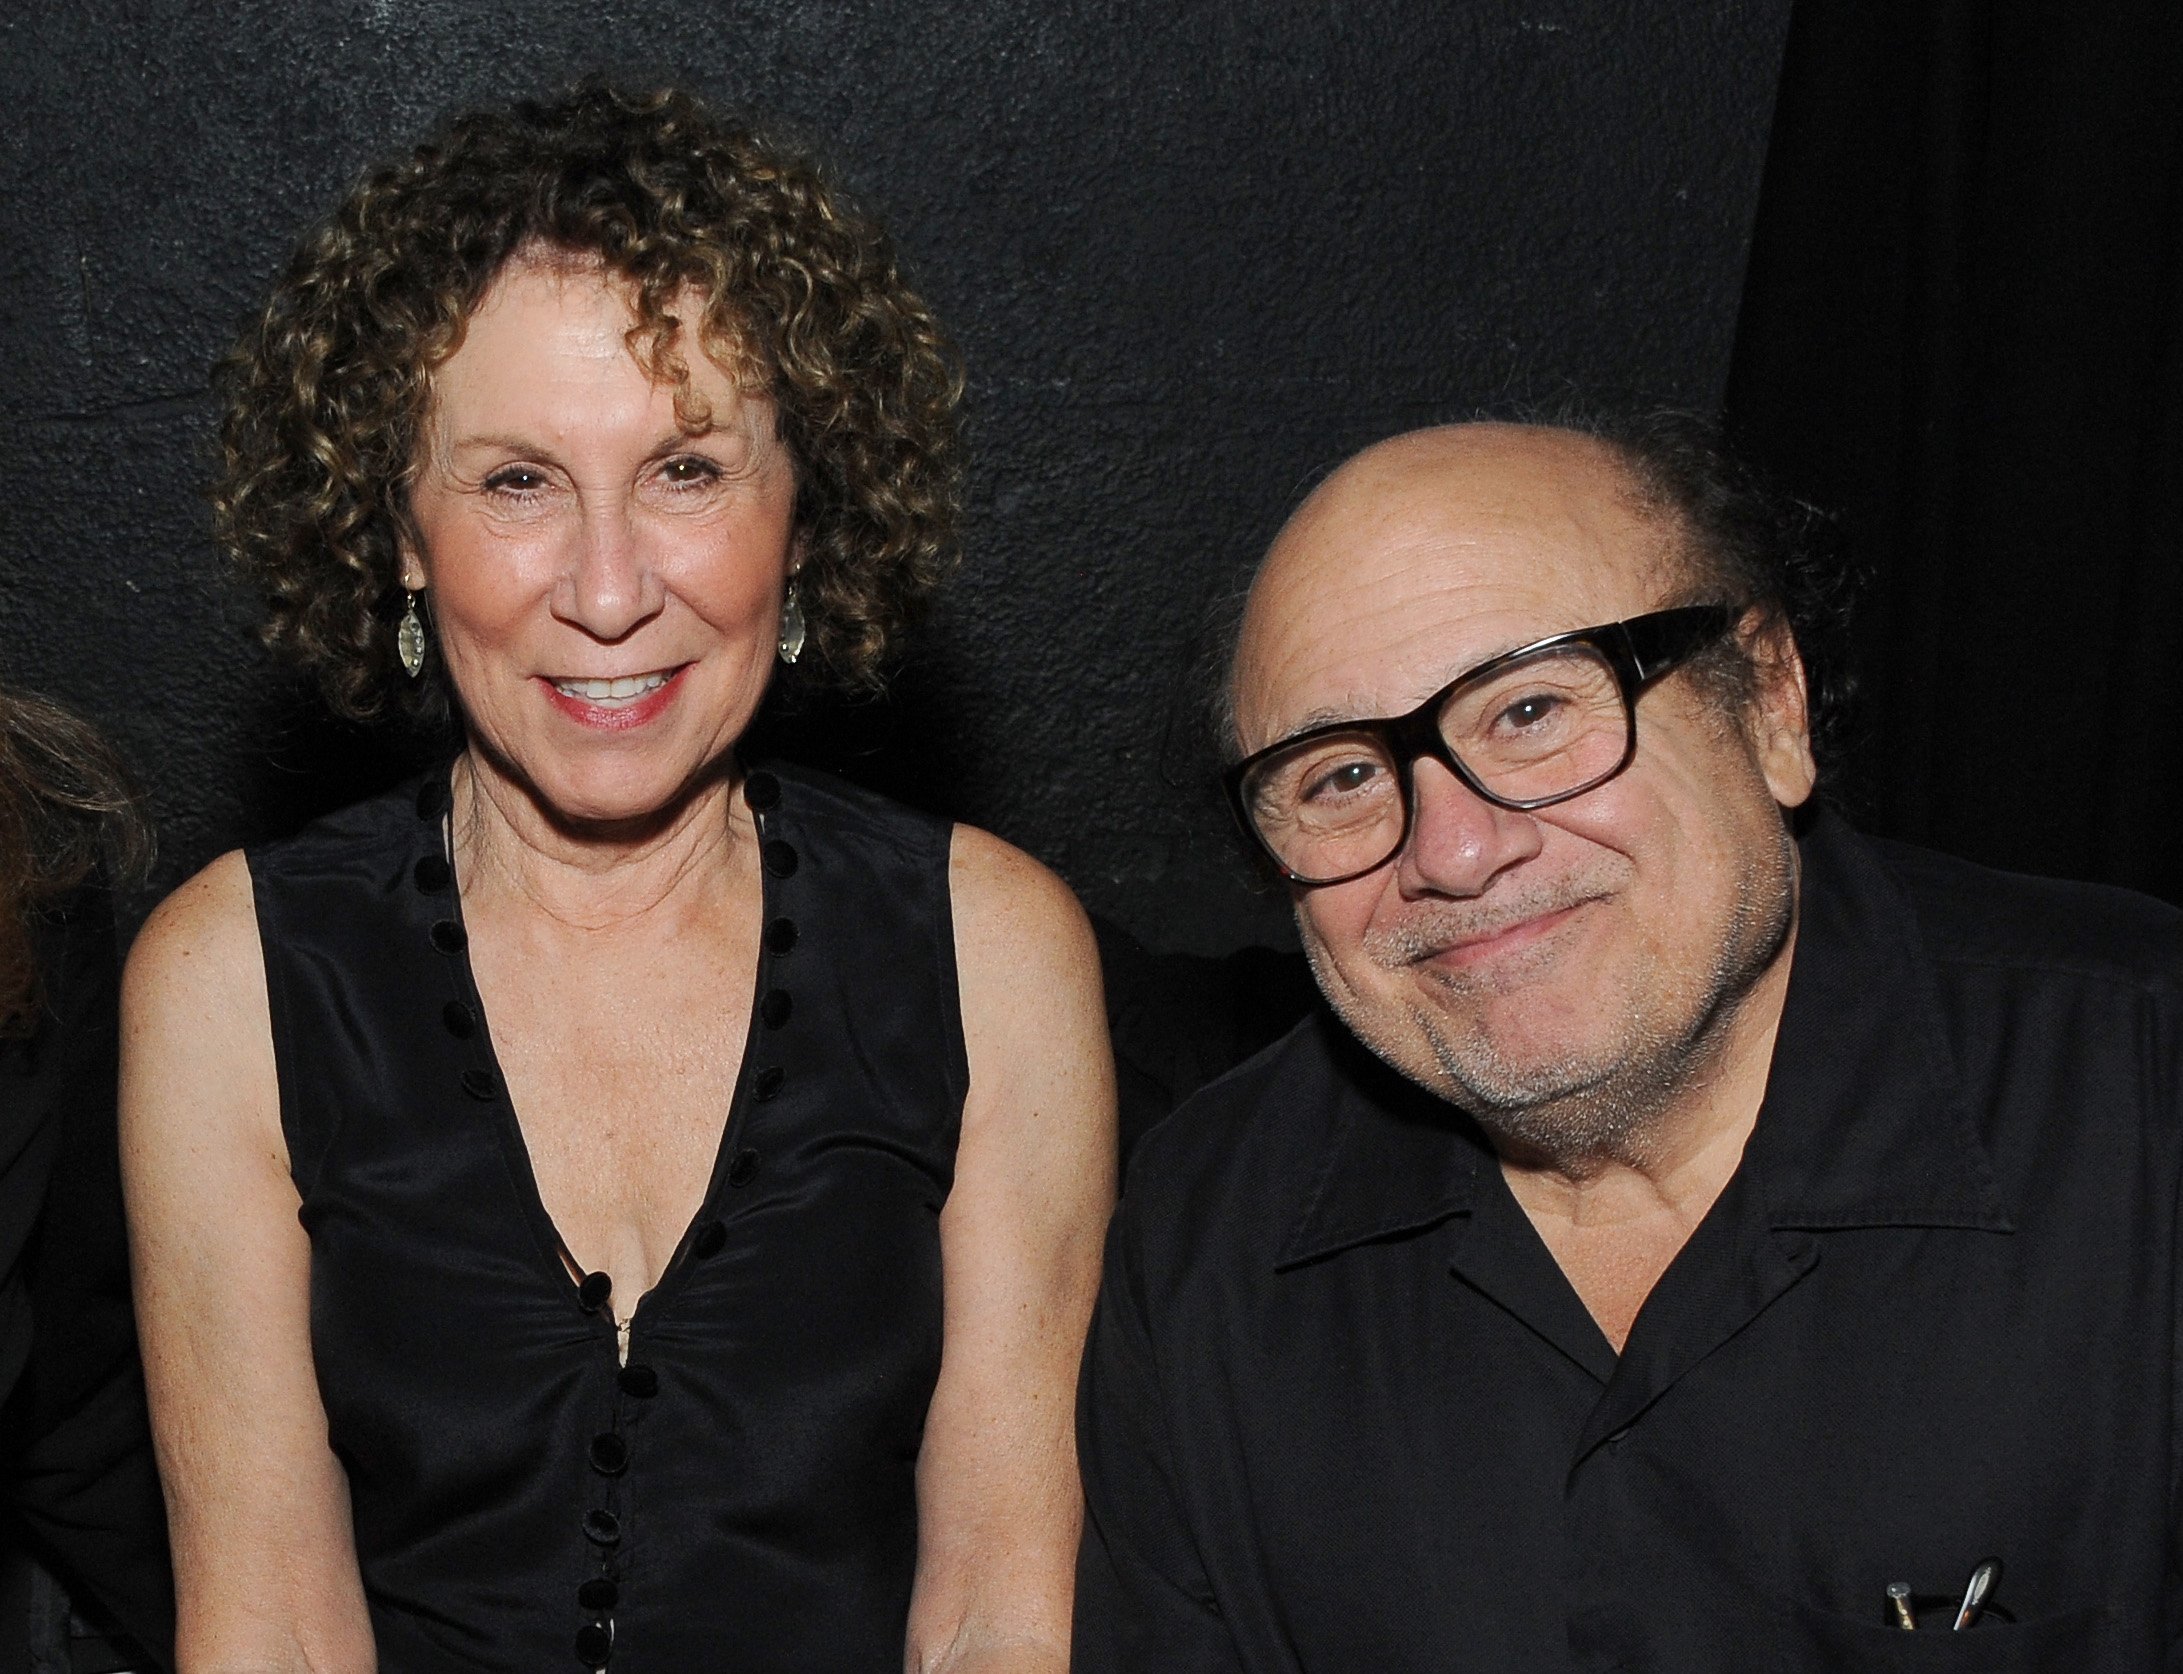 Rhea Perlman and Danny DeVito attend the International Myeloma Foundation 8th Annual Comedy Celebration on November 8, 2014 | Photo: GettyImages